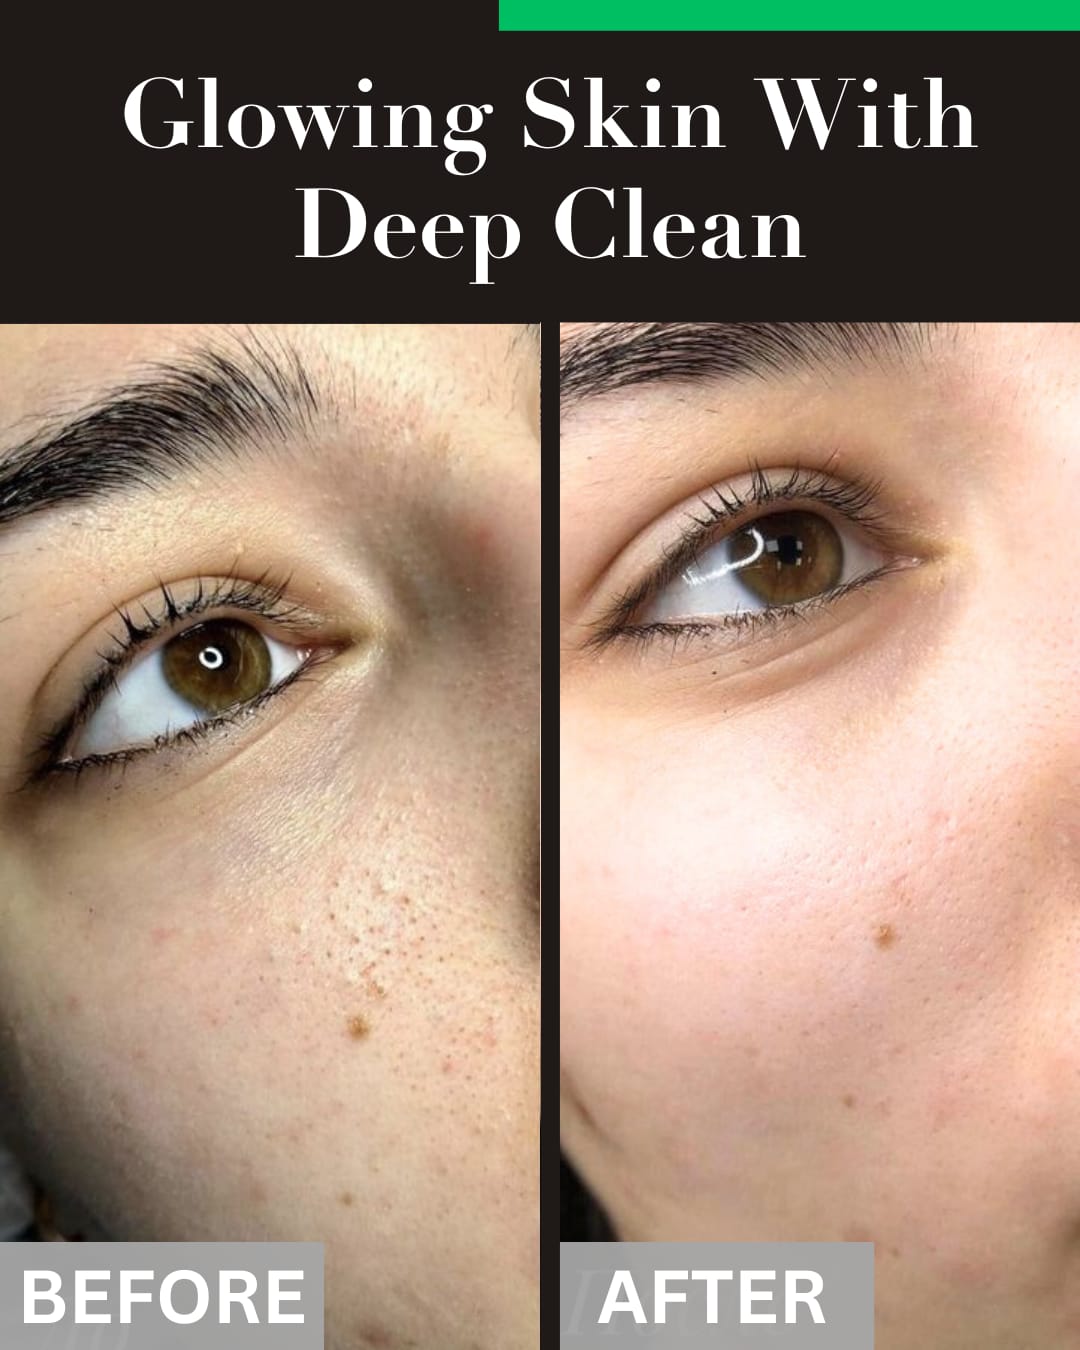 Glowing Skin With Deep Clean